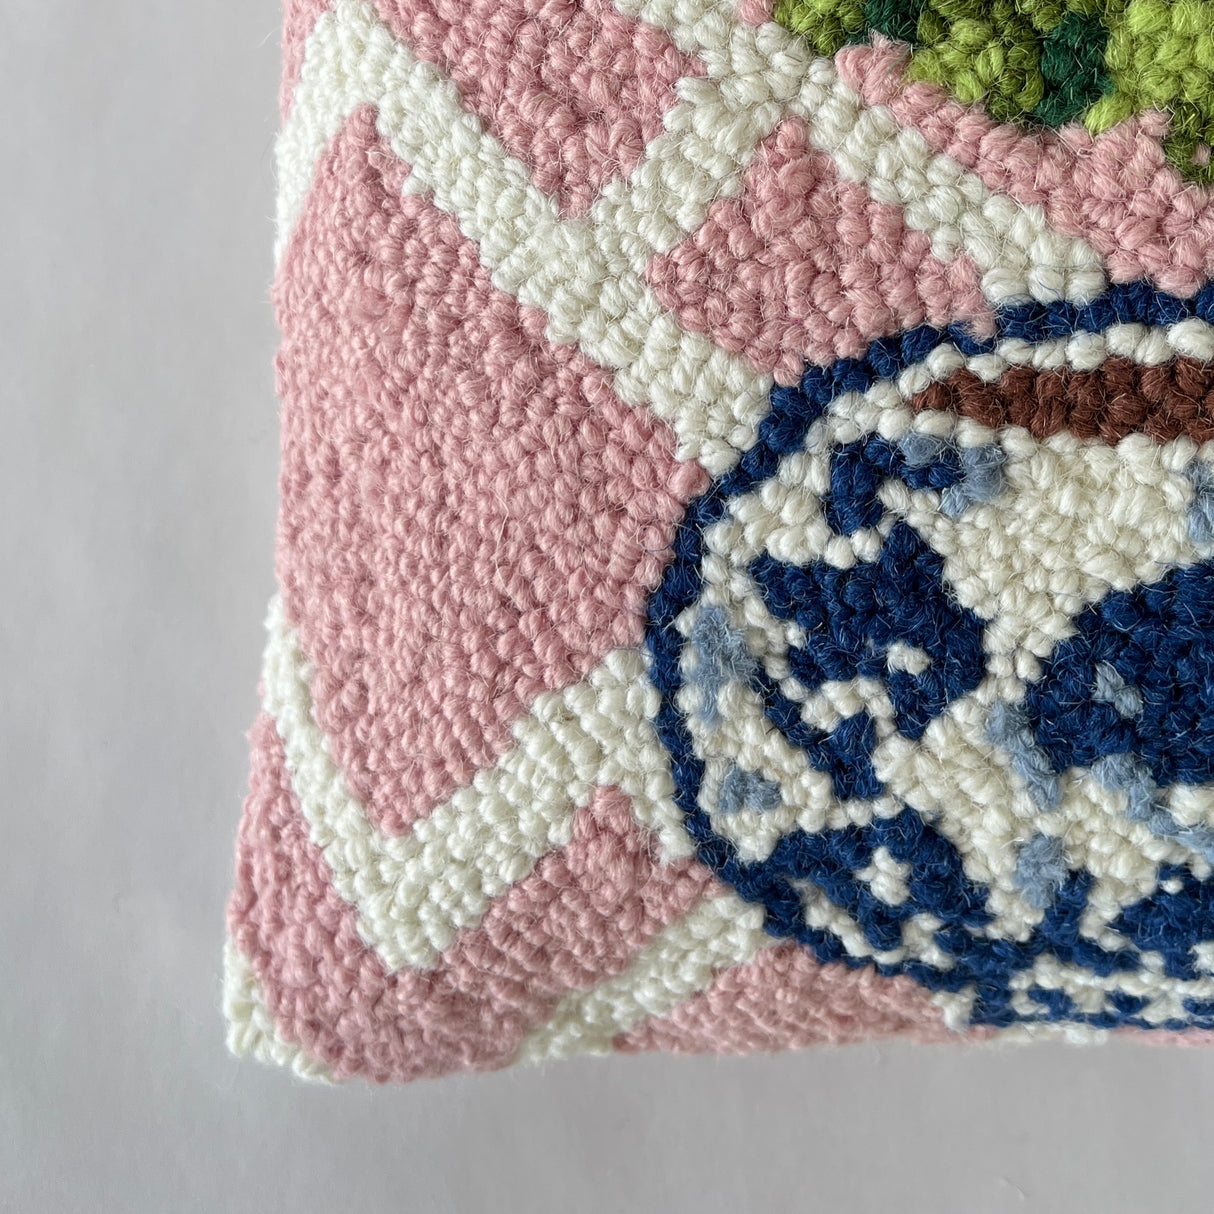 Pink Topiary Hooked Wool Pillow